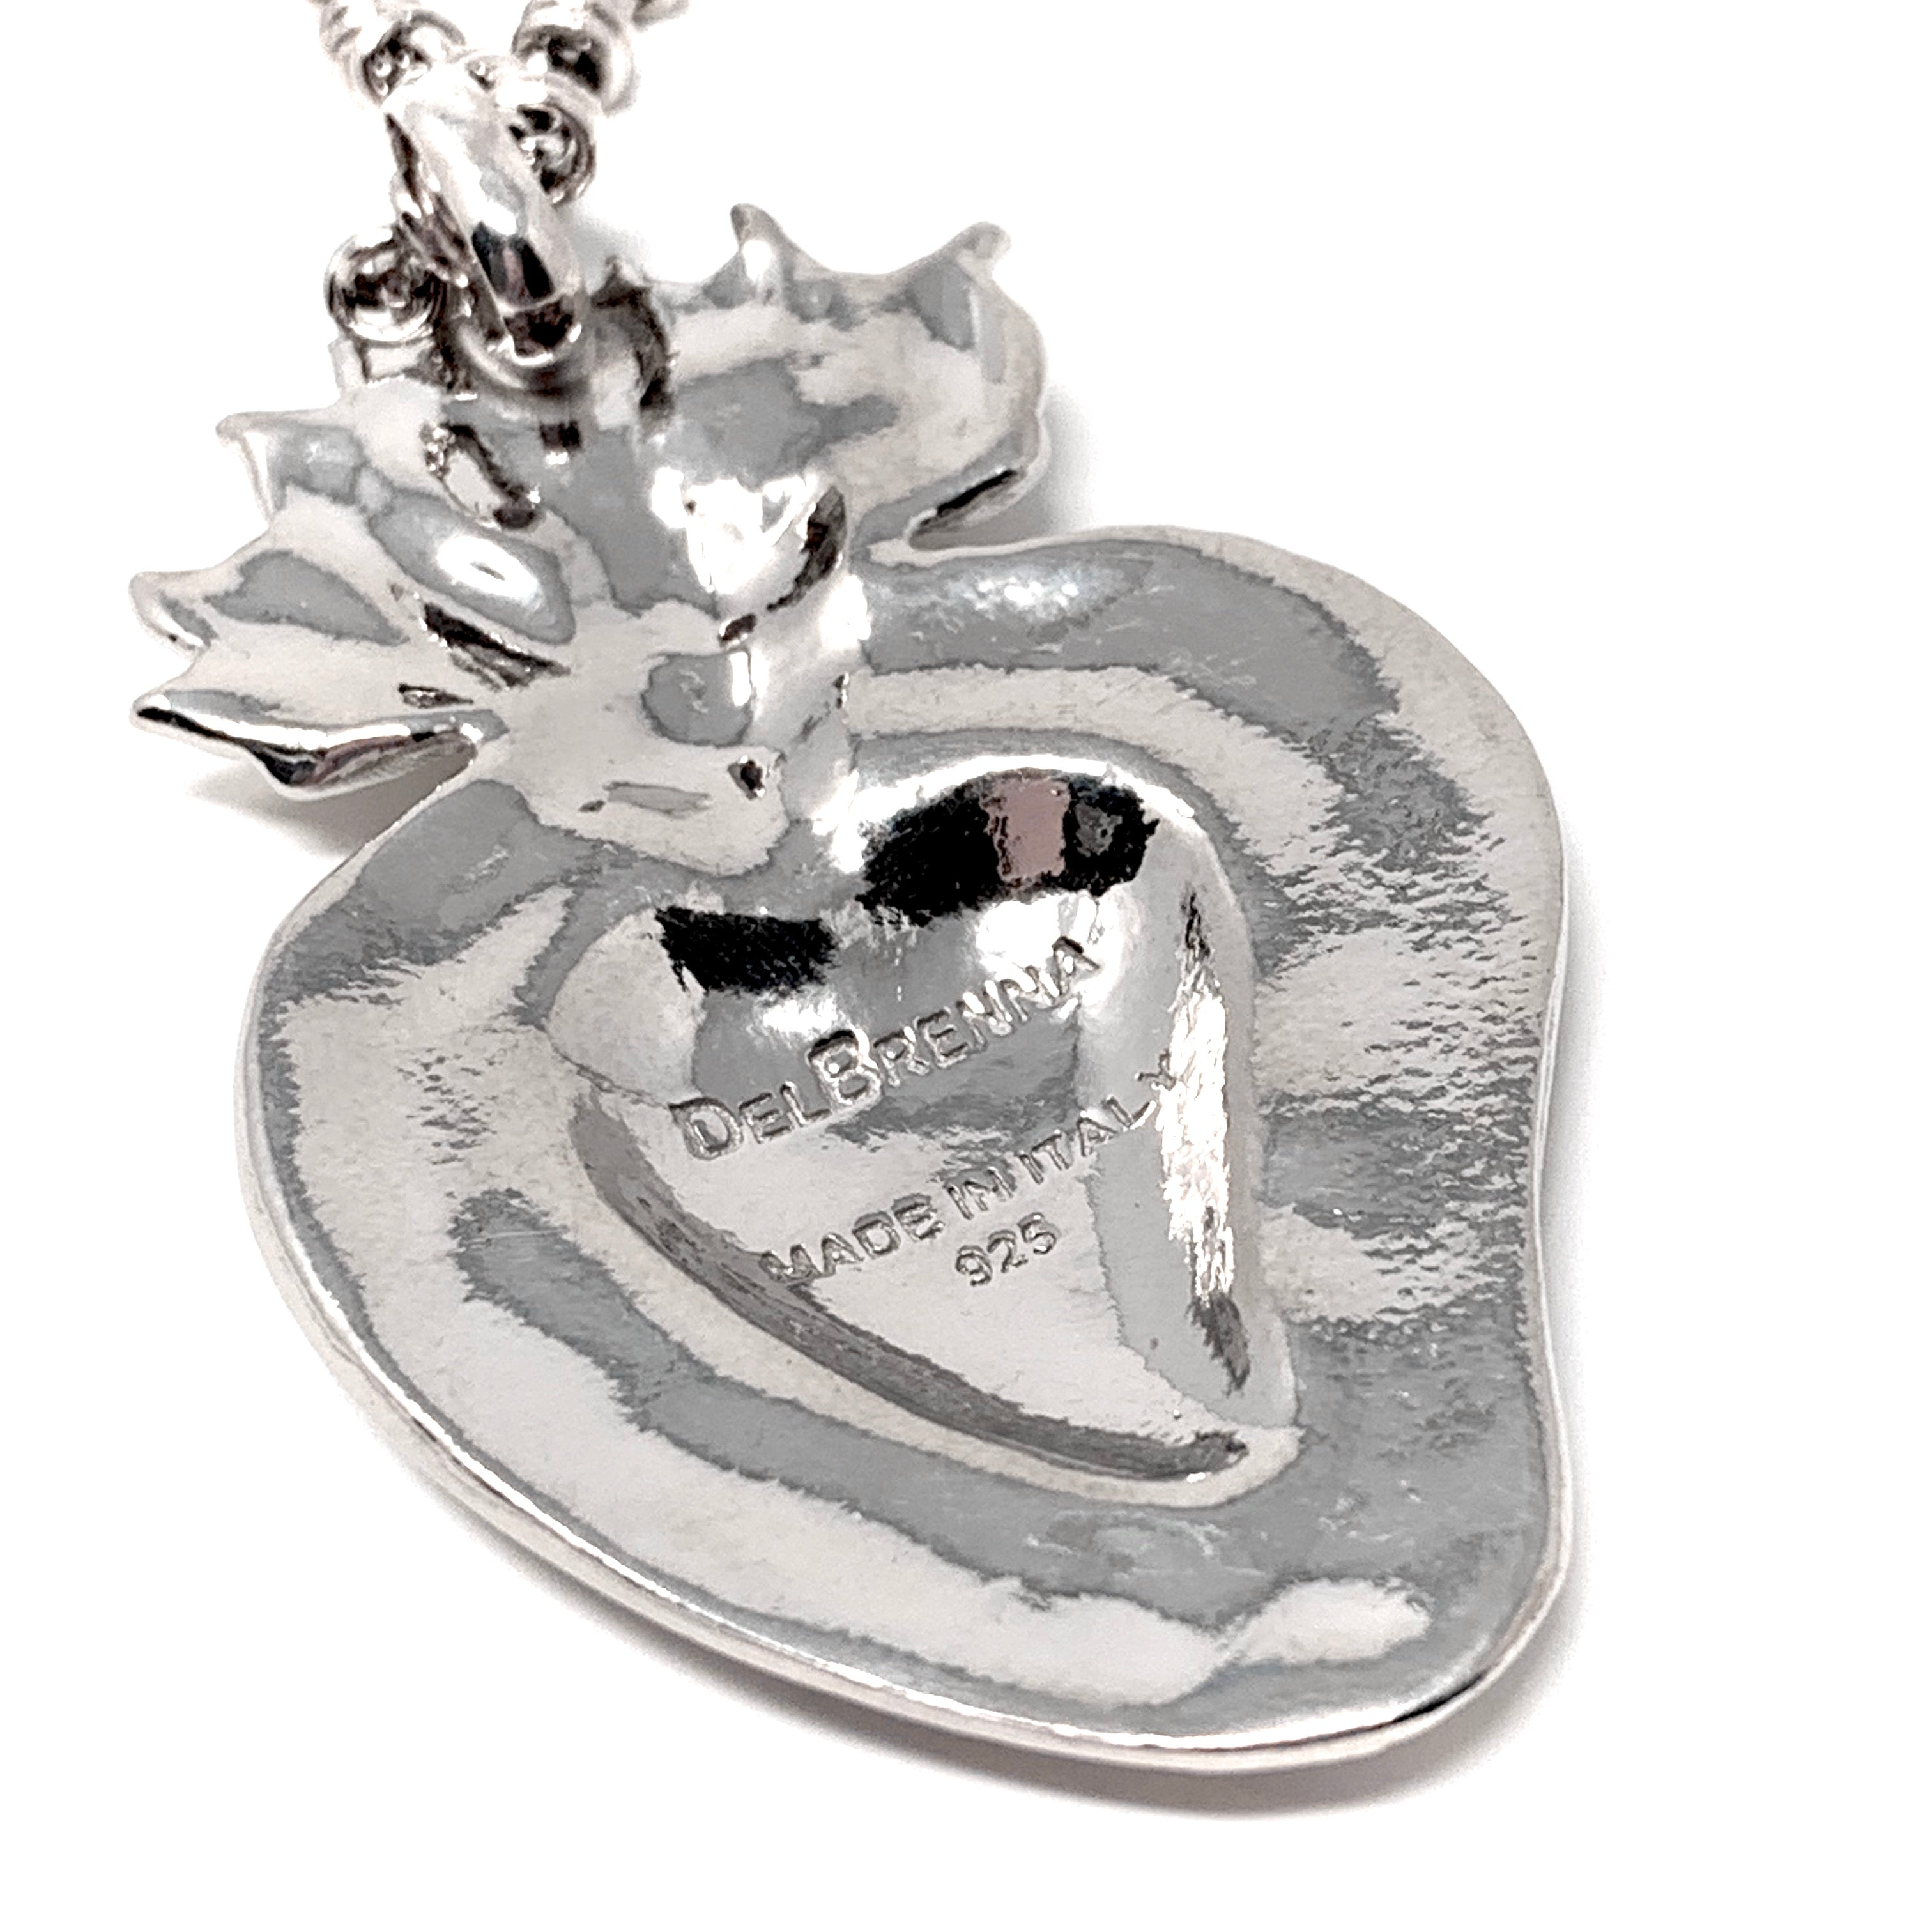 Flaming Heart Pendant in Silver